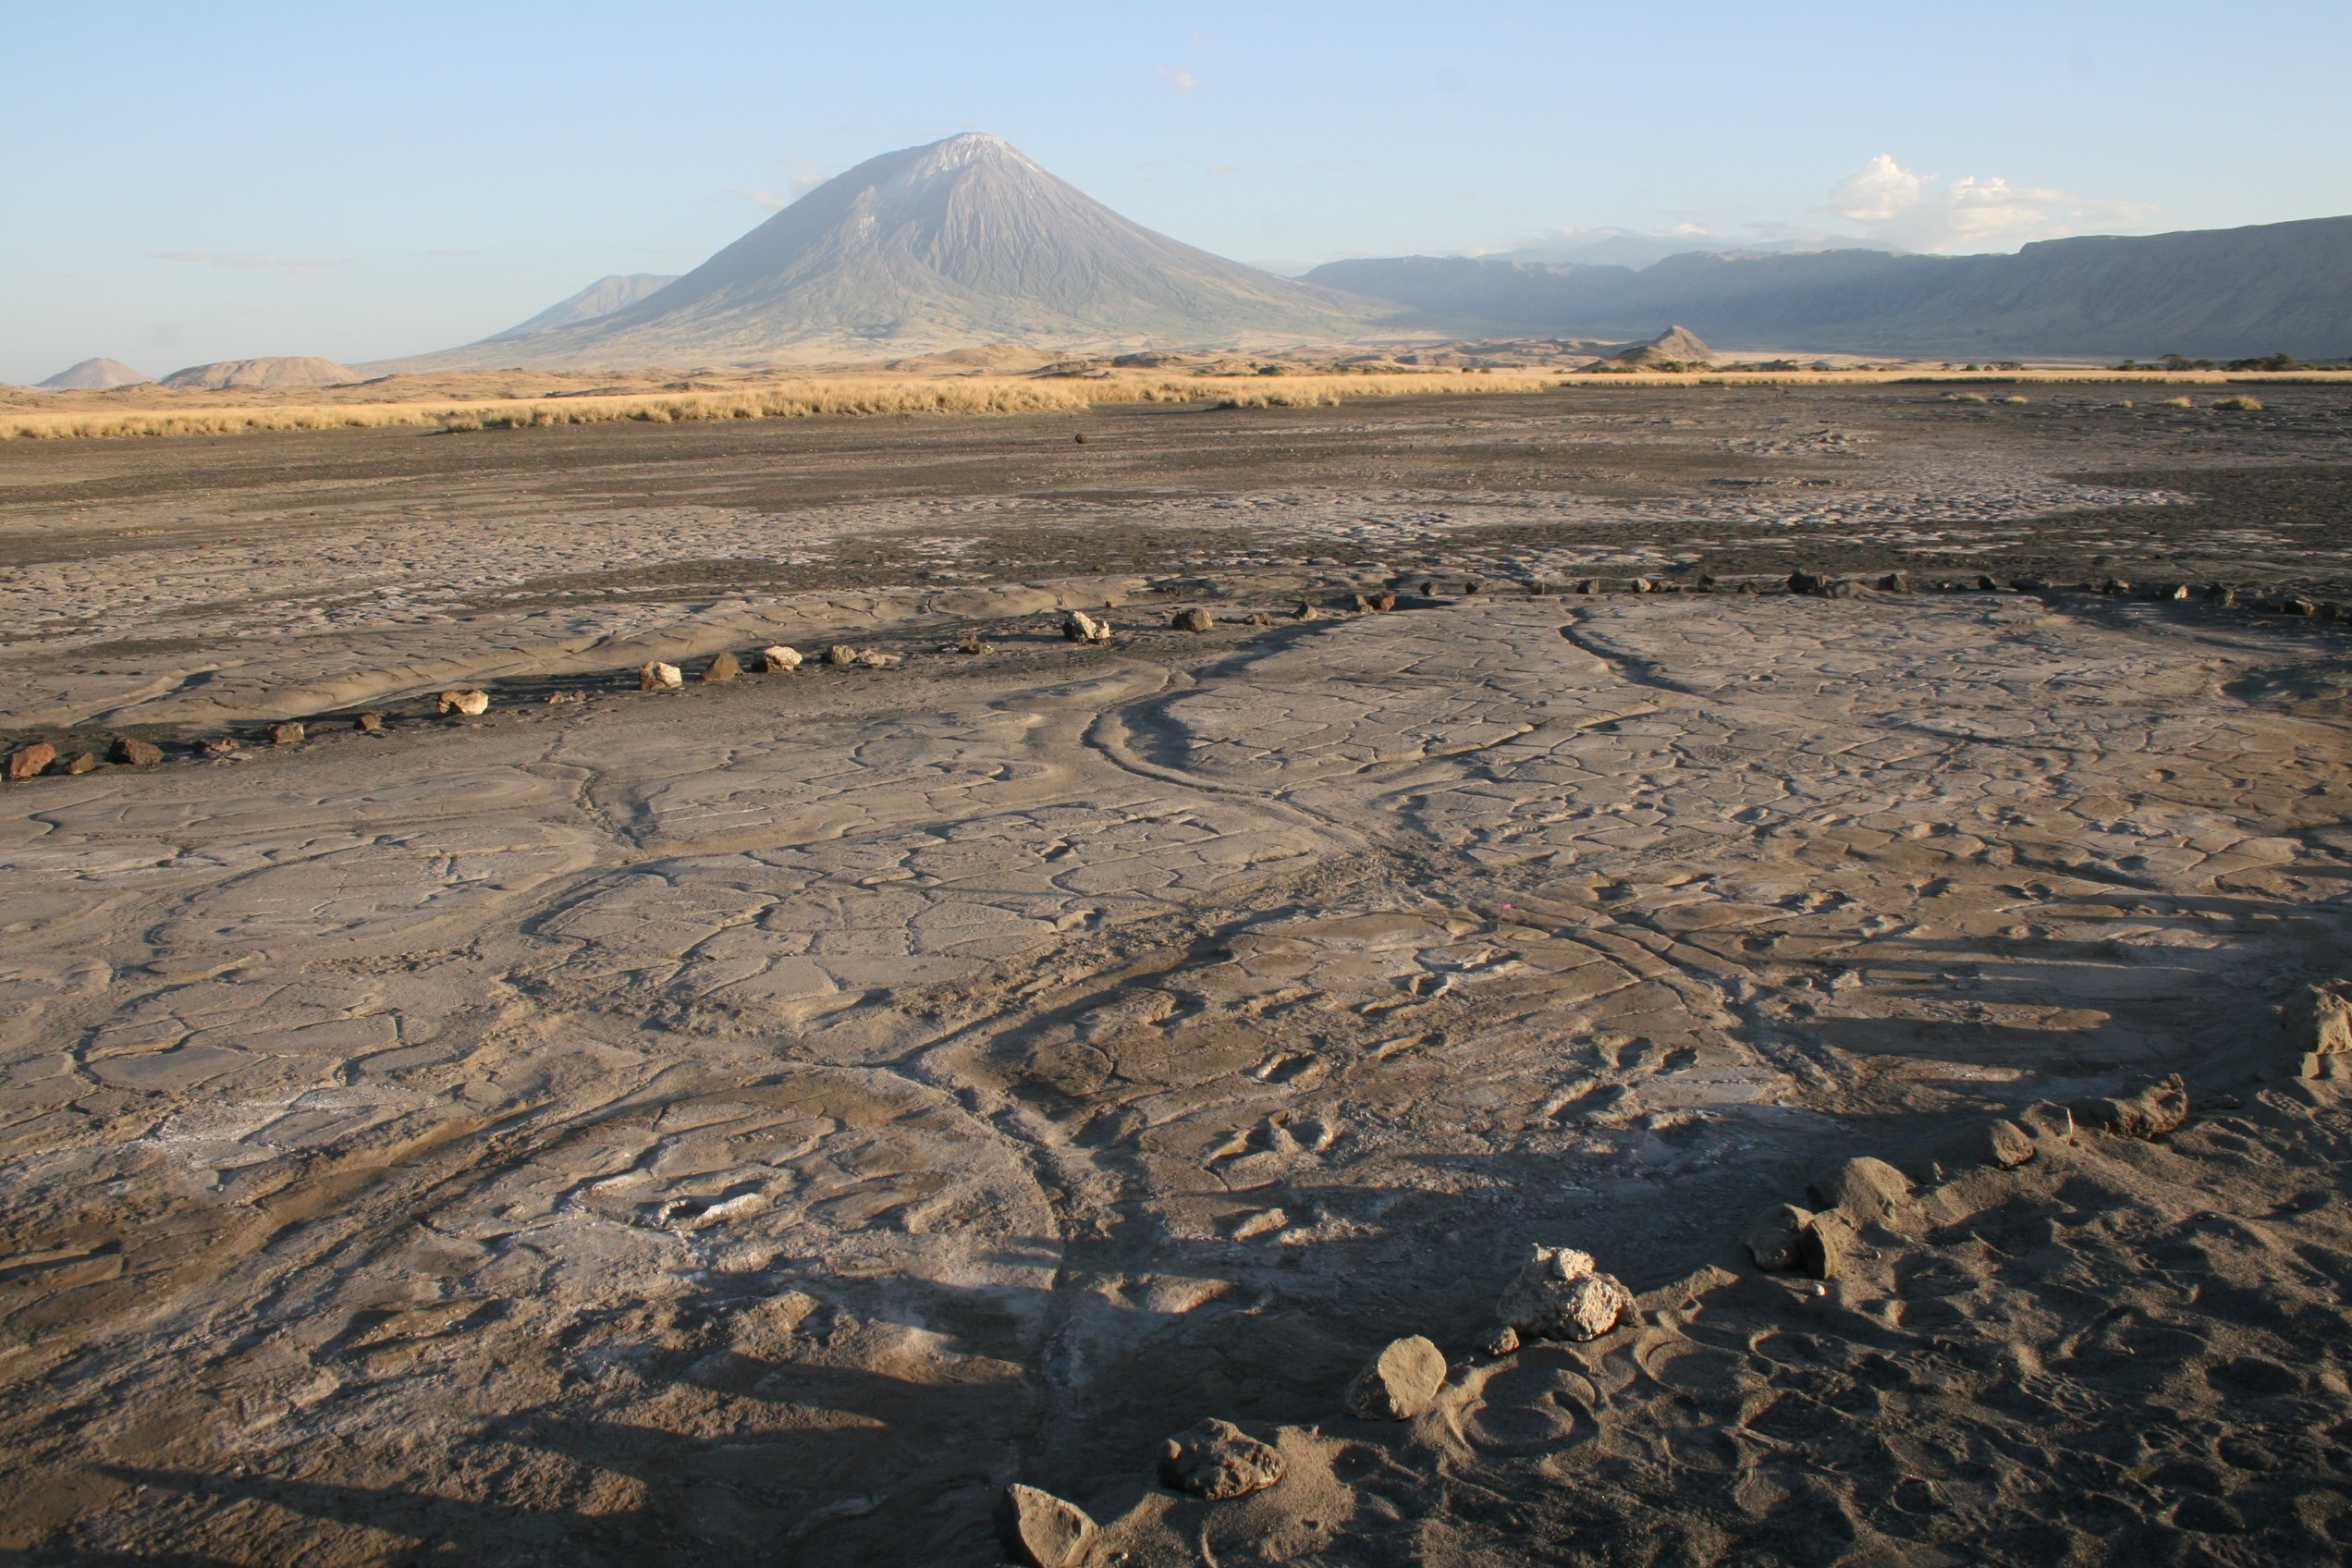 The Engare Sero footprint site, which preserves at least 408 human footprints